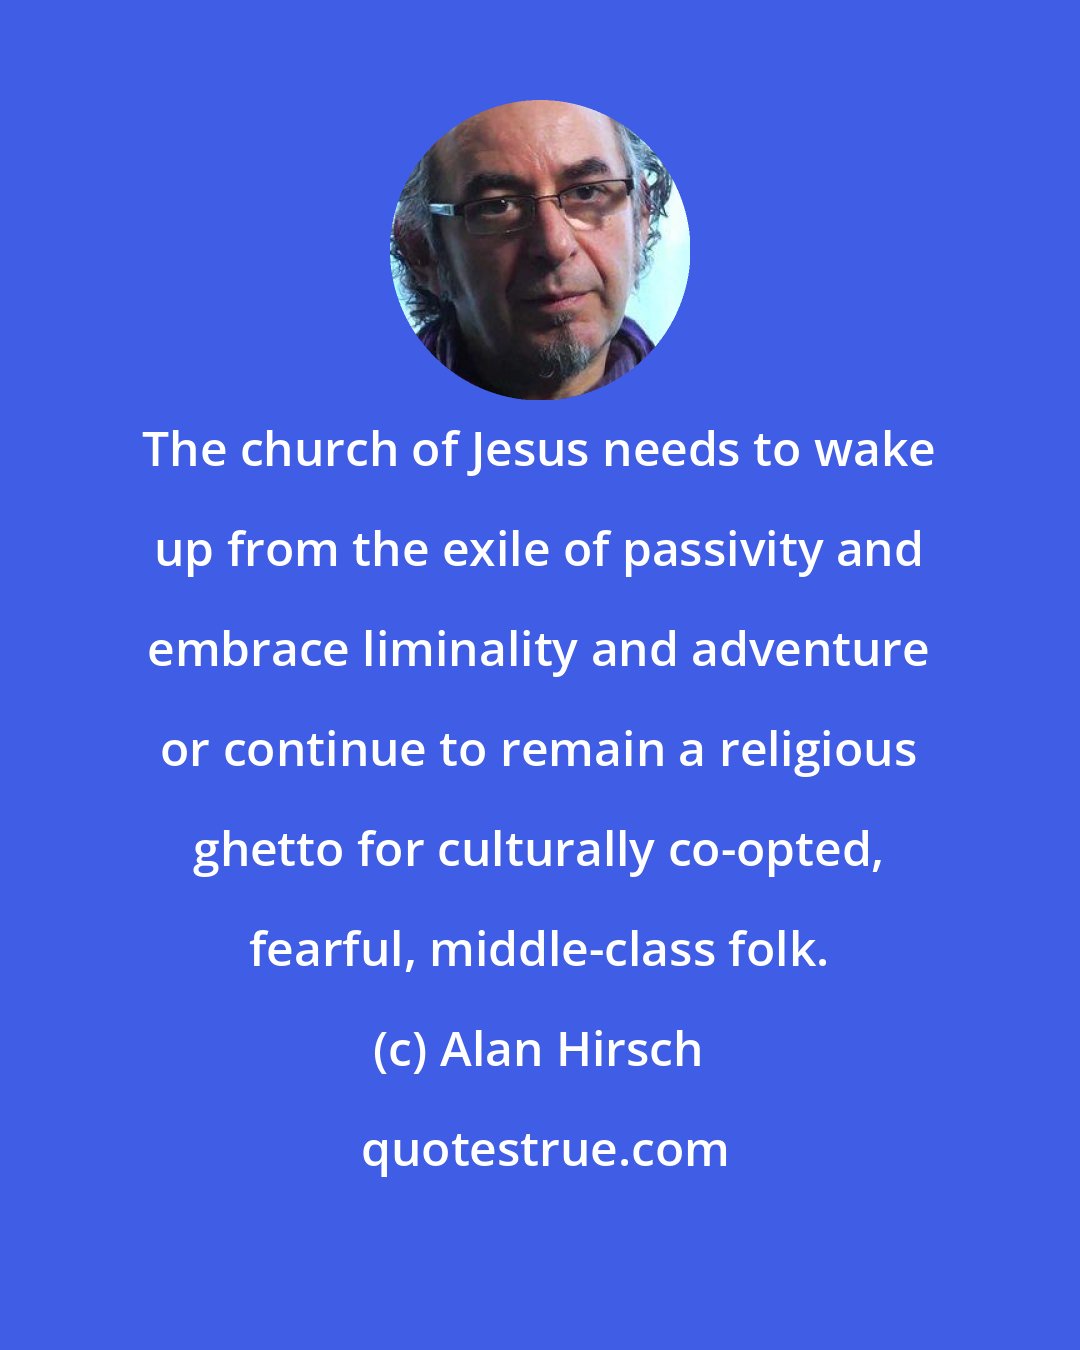 Alan Hirsch: The church of Jesus needs to wake up from the exile of passivity and embrace liminality and adventure or continue to remain a religious ghetto for culturally co-opted, fearful, middle-class folk.